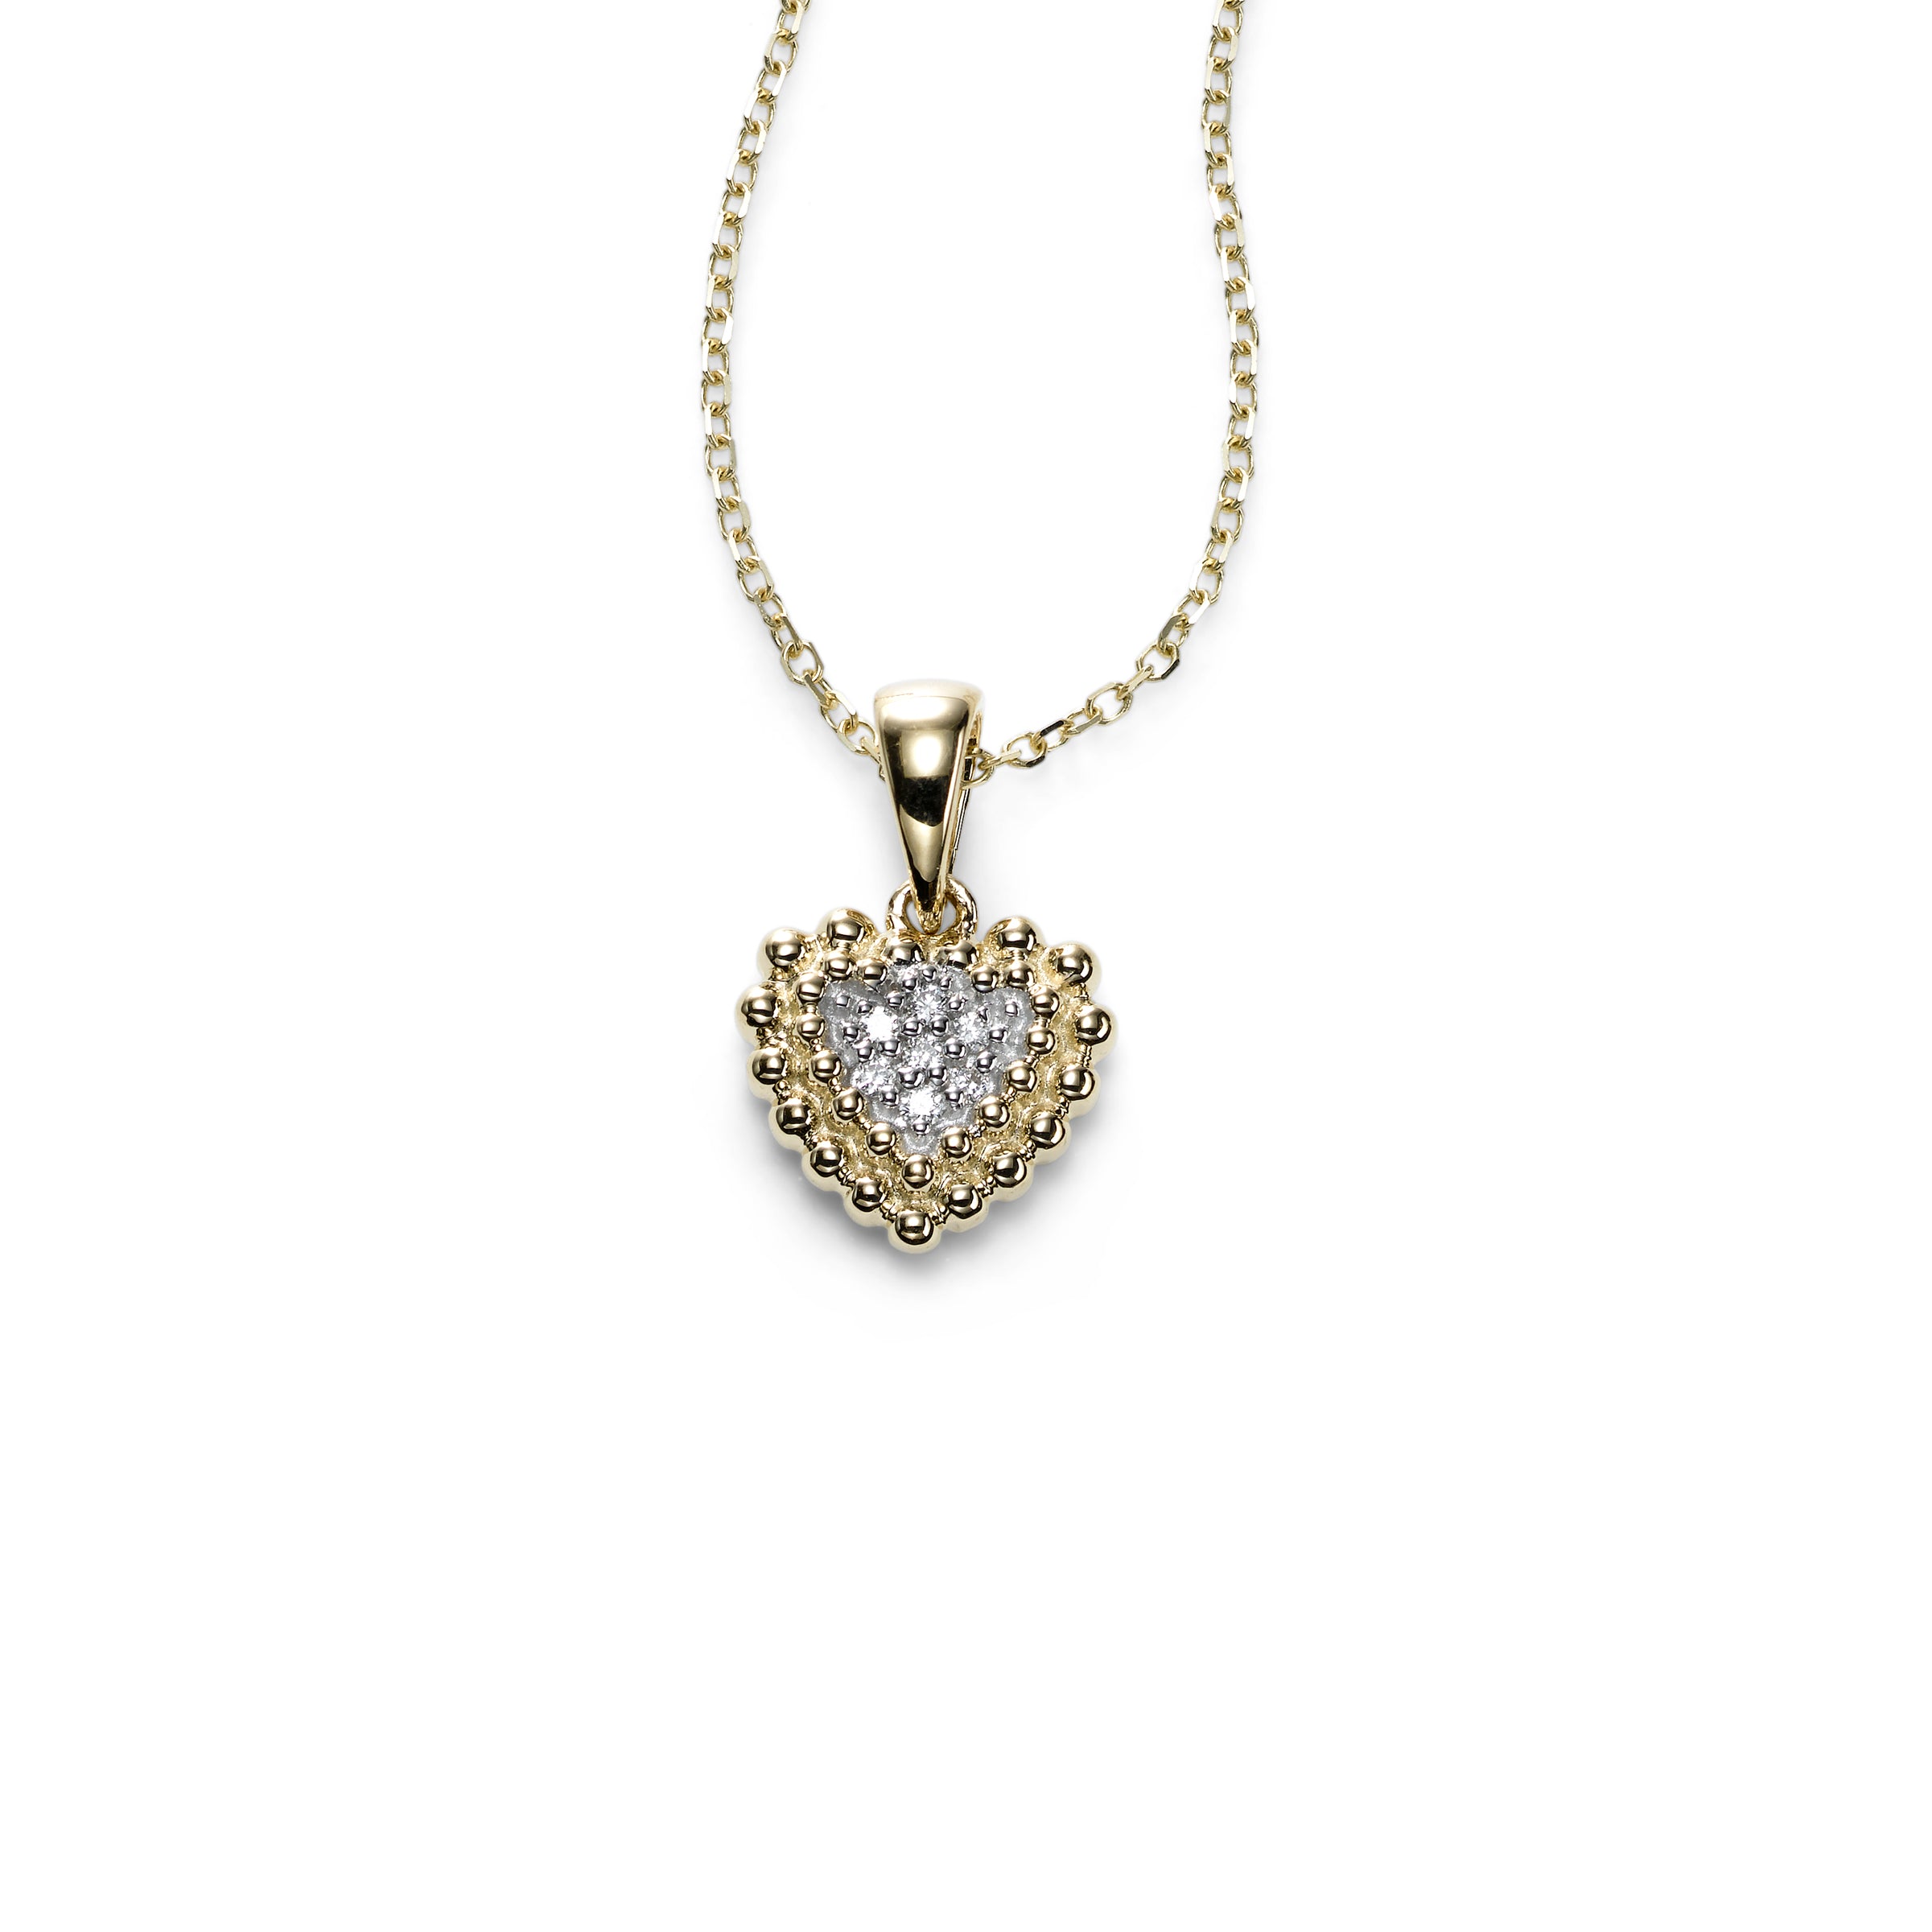 Small Pave Heart Necklace